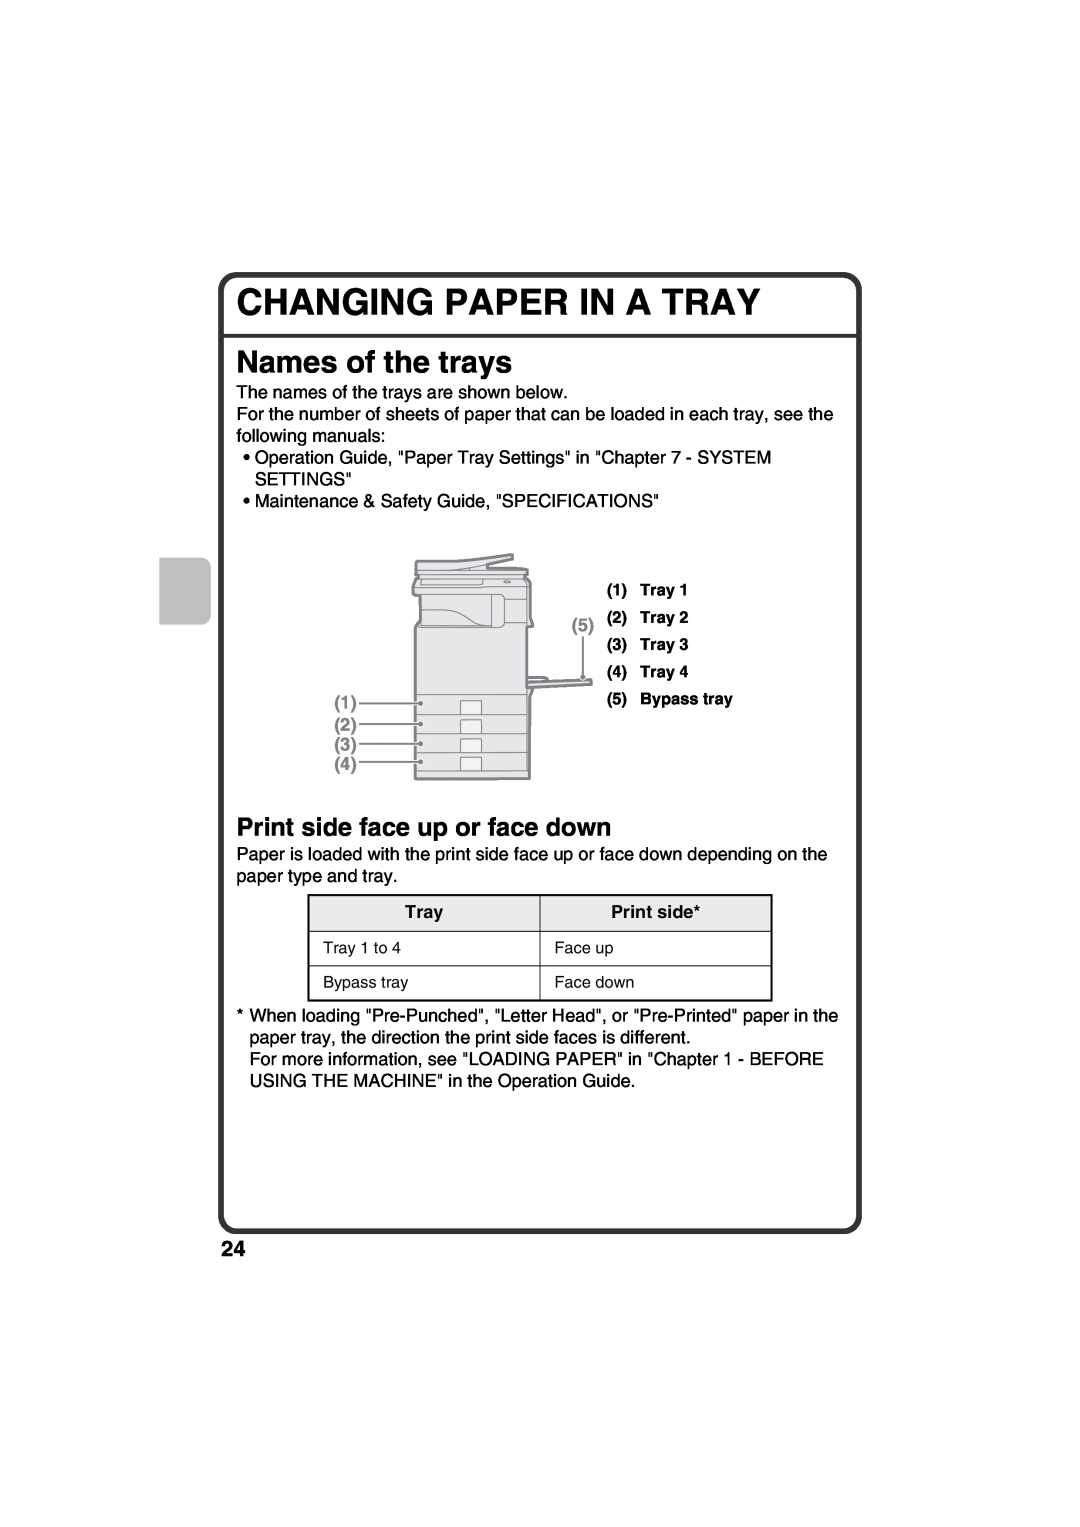 Sharp MX-B401, TINSE4377FCZZ quick start Changing Paper In A Tray, Names of the trays, Print side face up or face down 